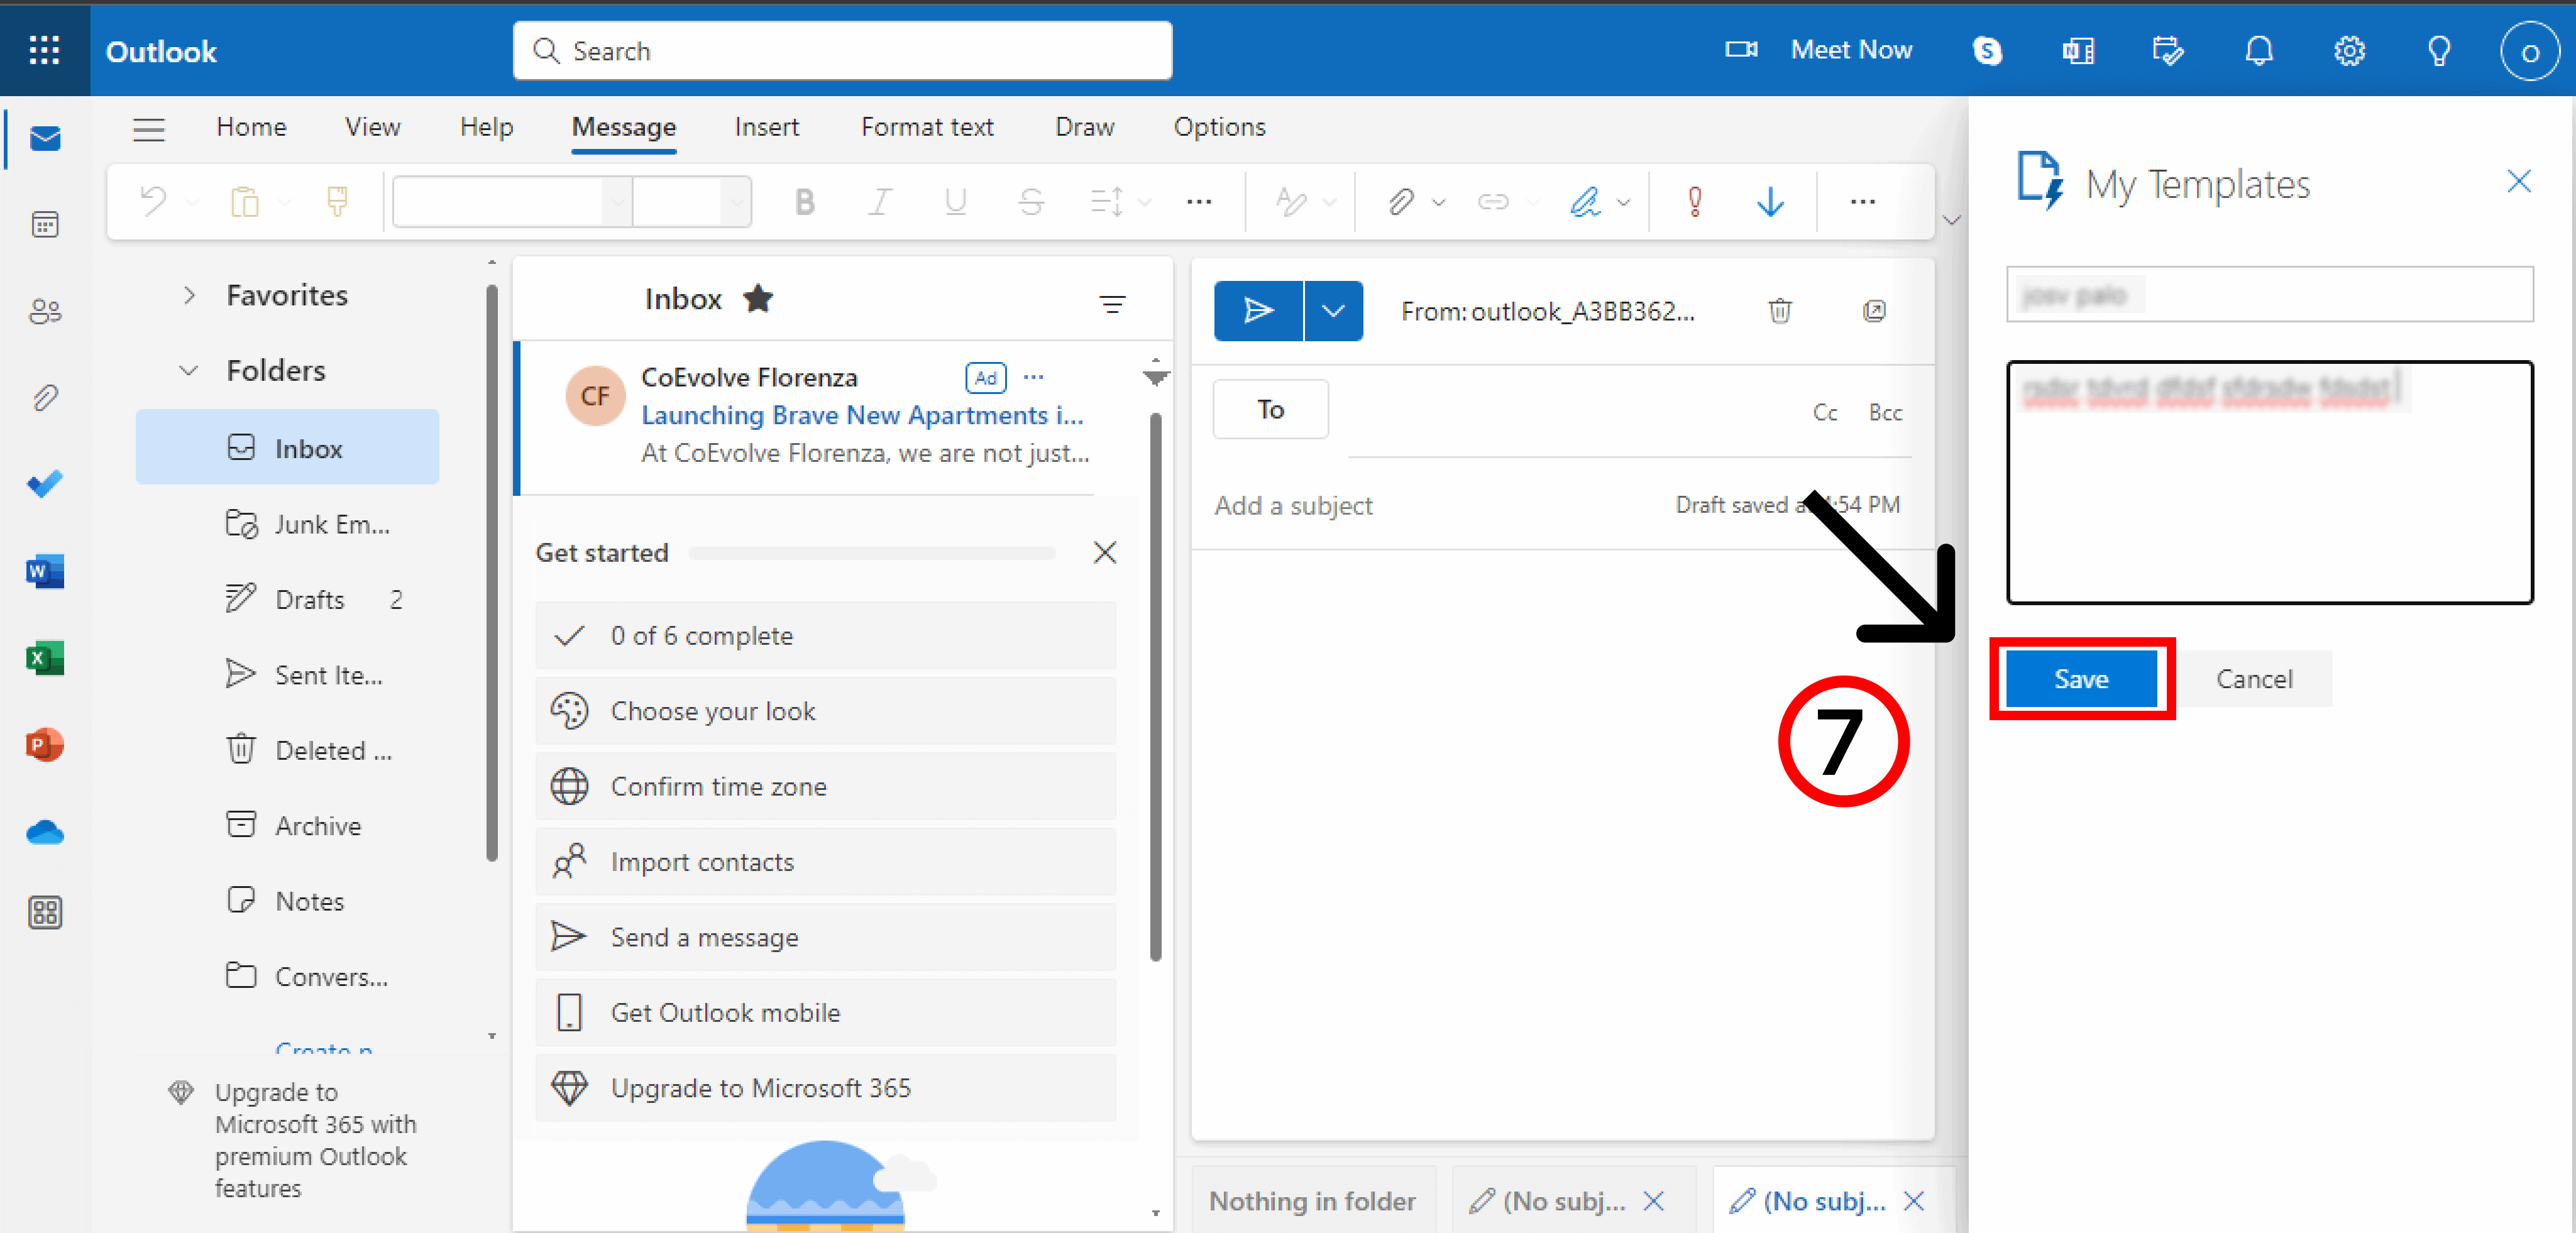 How To Create An Email Template in Outlook - Step 7 - NeoDove
